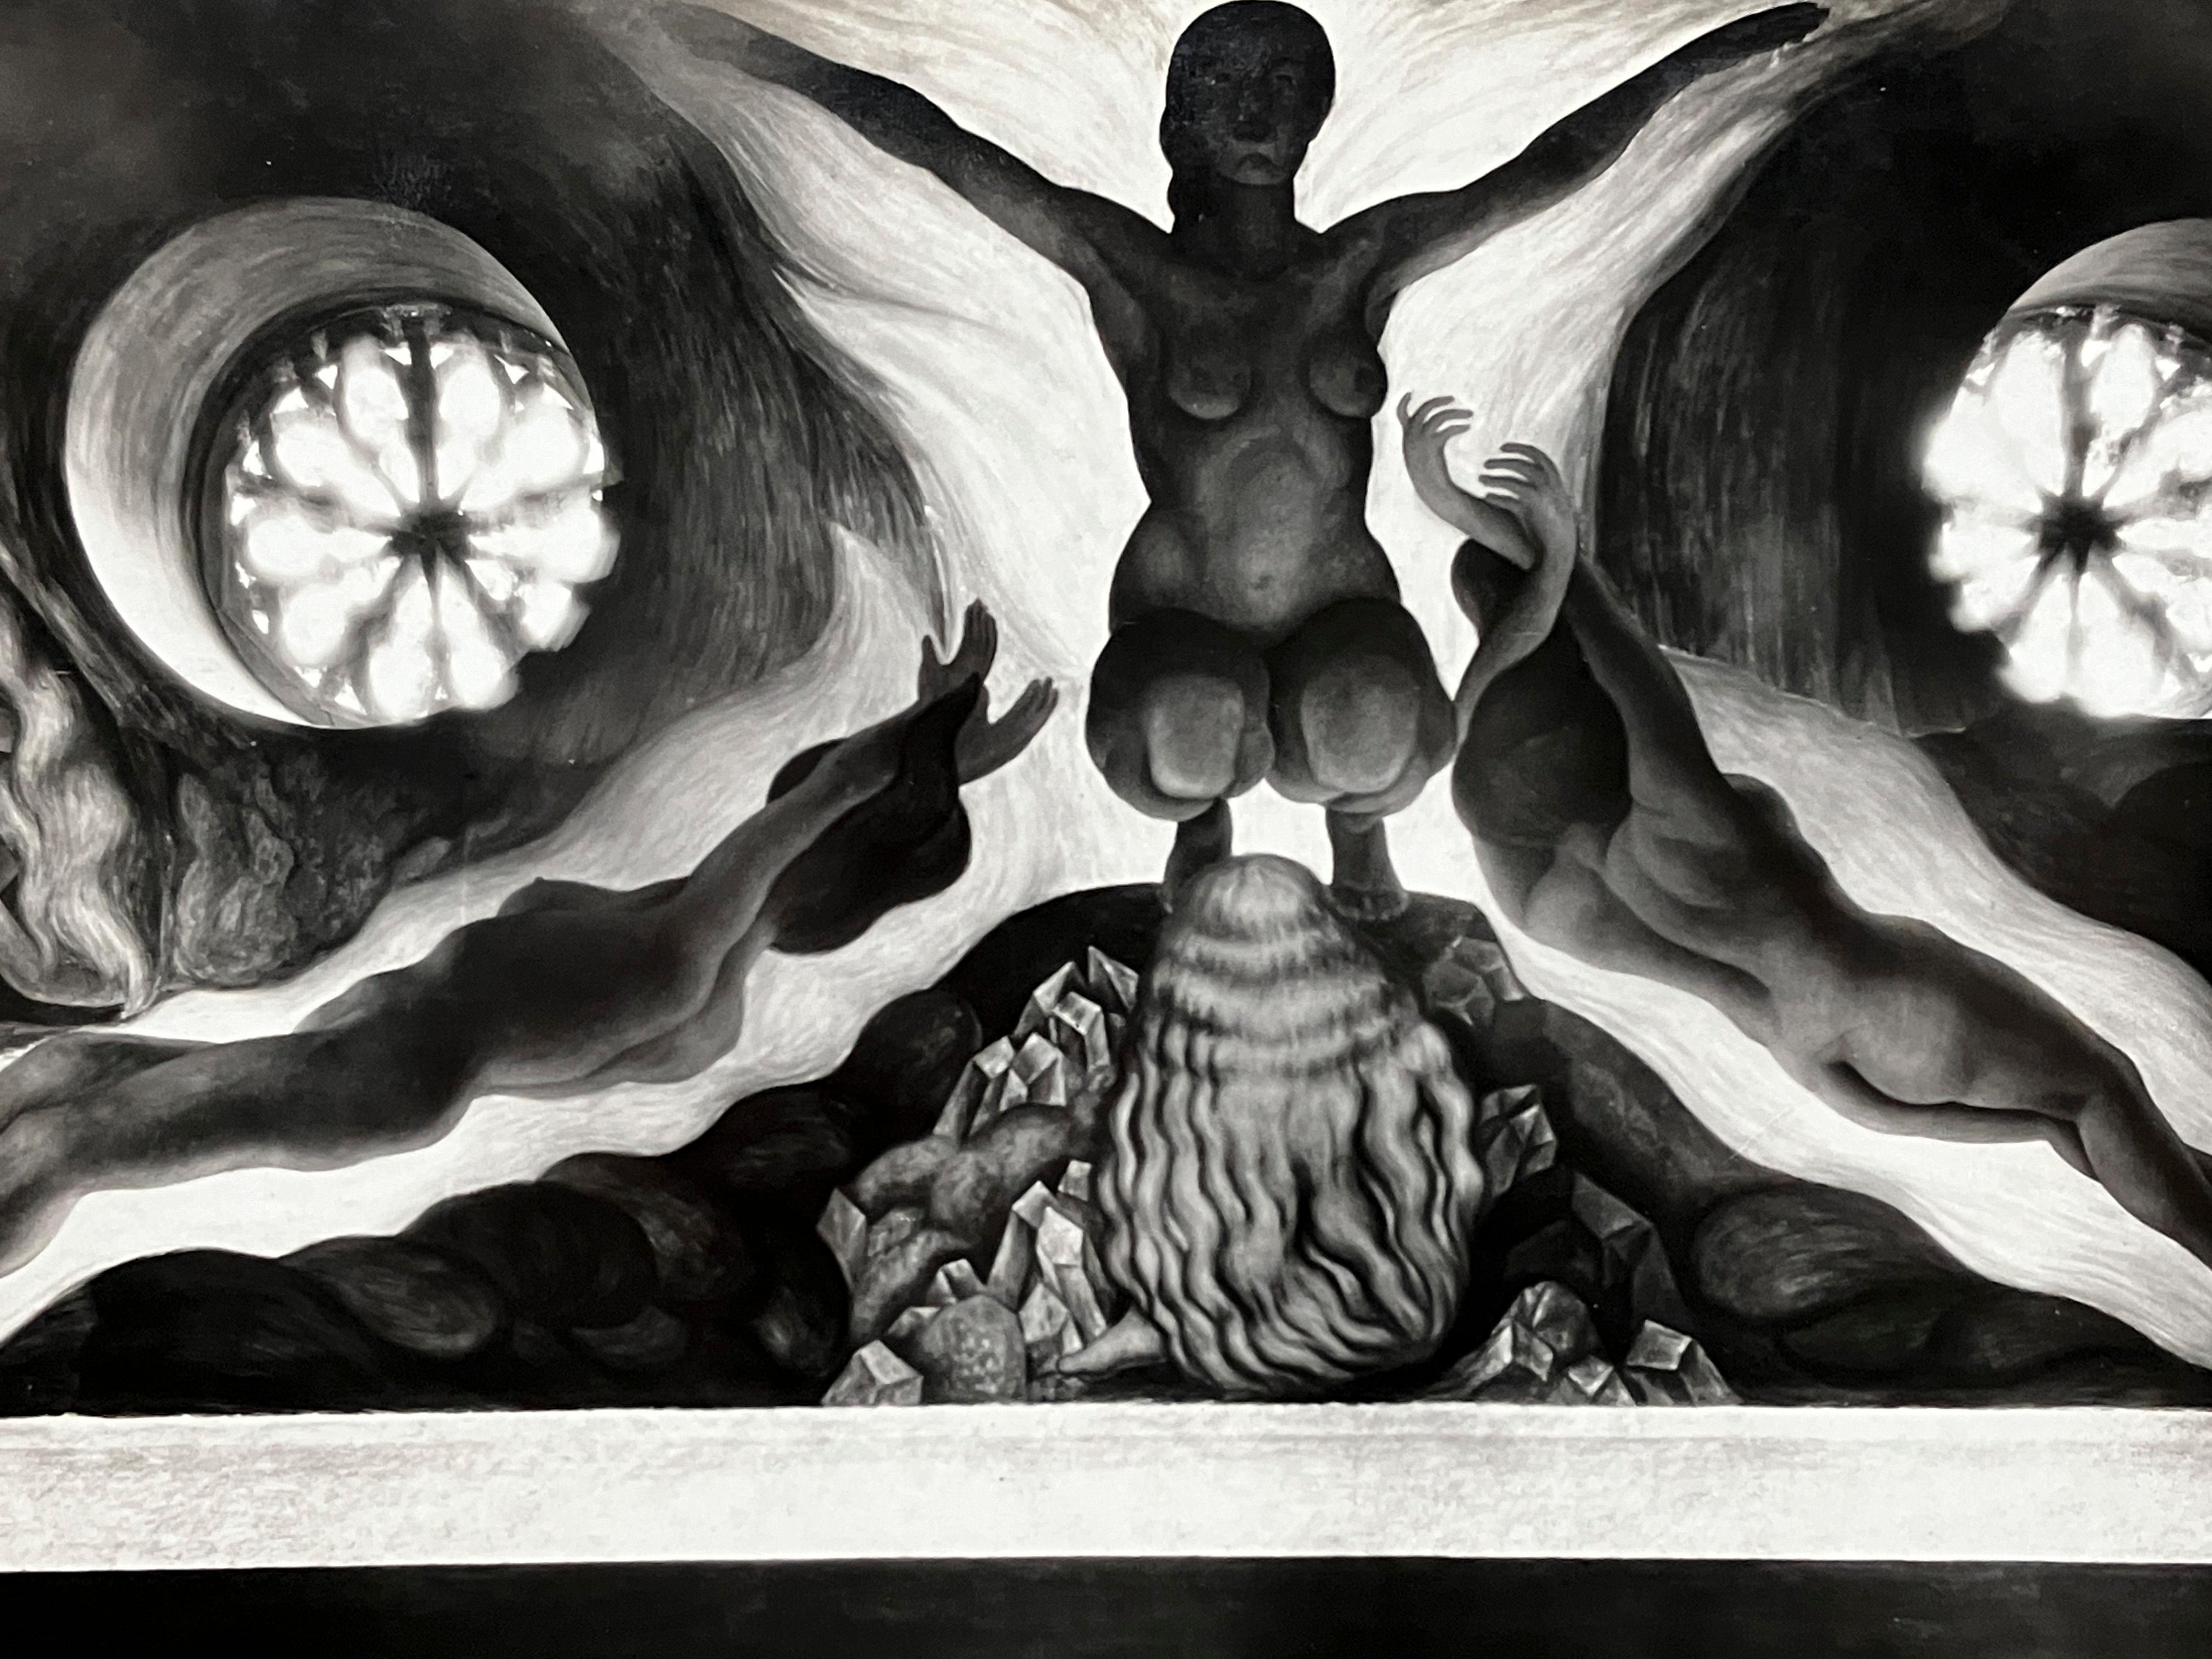 An original 1920s silver gelatin print by photographer Tina Modotti, showing a fresco, "The Spirit of Fire", in the Agricultural School-Chapingo, Mexico by artist Diego Rivera.  Photo is stamped “Photographs-Tina Modotti Mexico, D.F.” on reverse. 